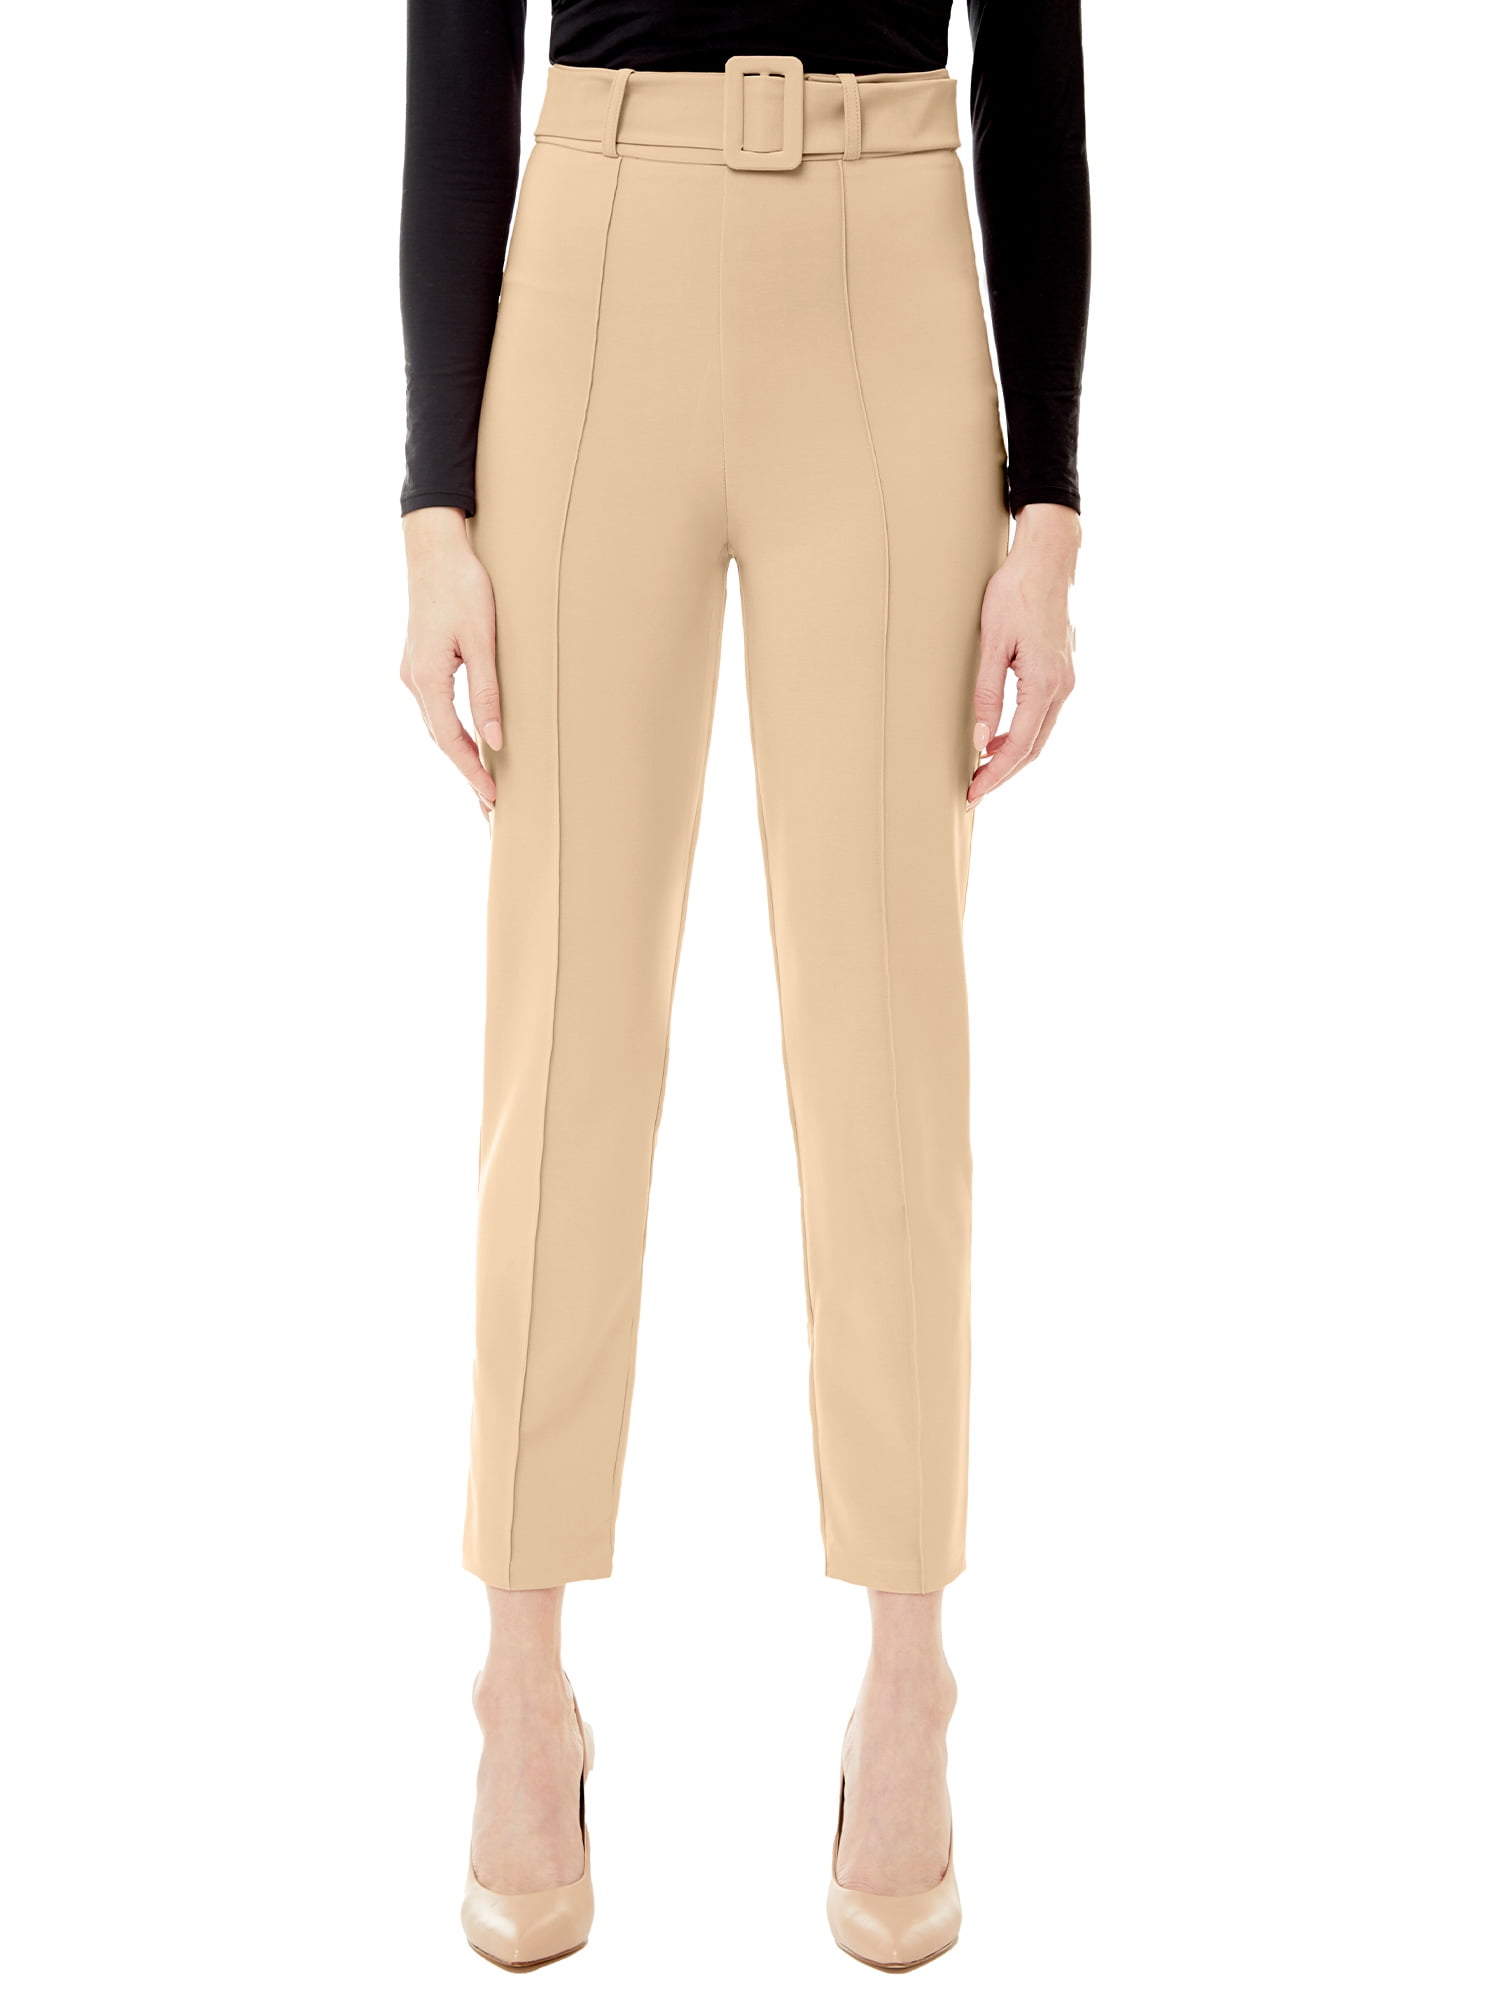 Brunello Cucinelli Cotton Trousers with Side-Zip Ankle Cuffs | Neiman Marcus